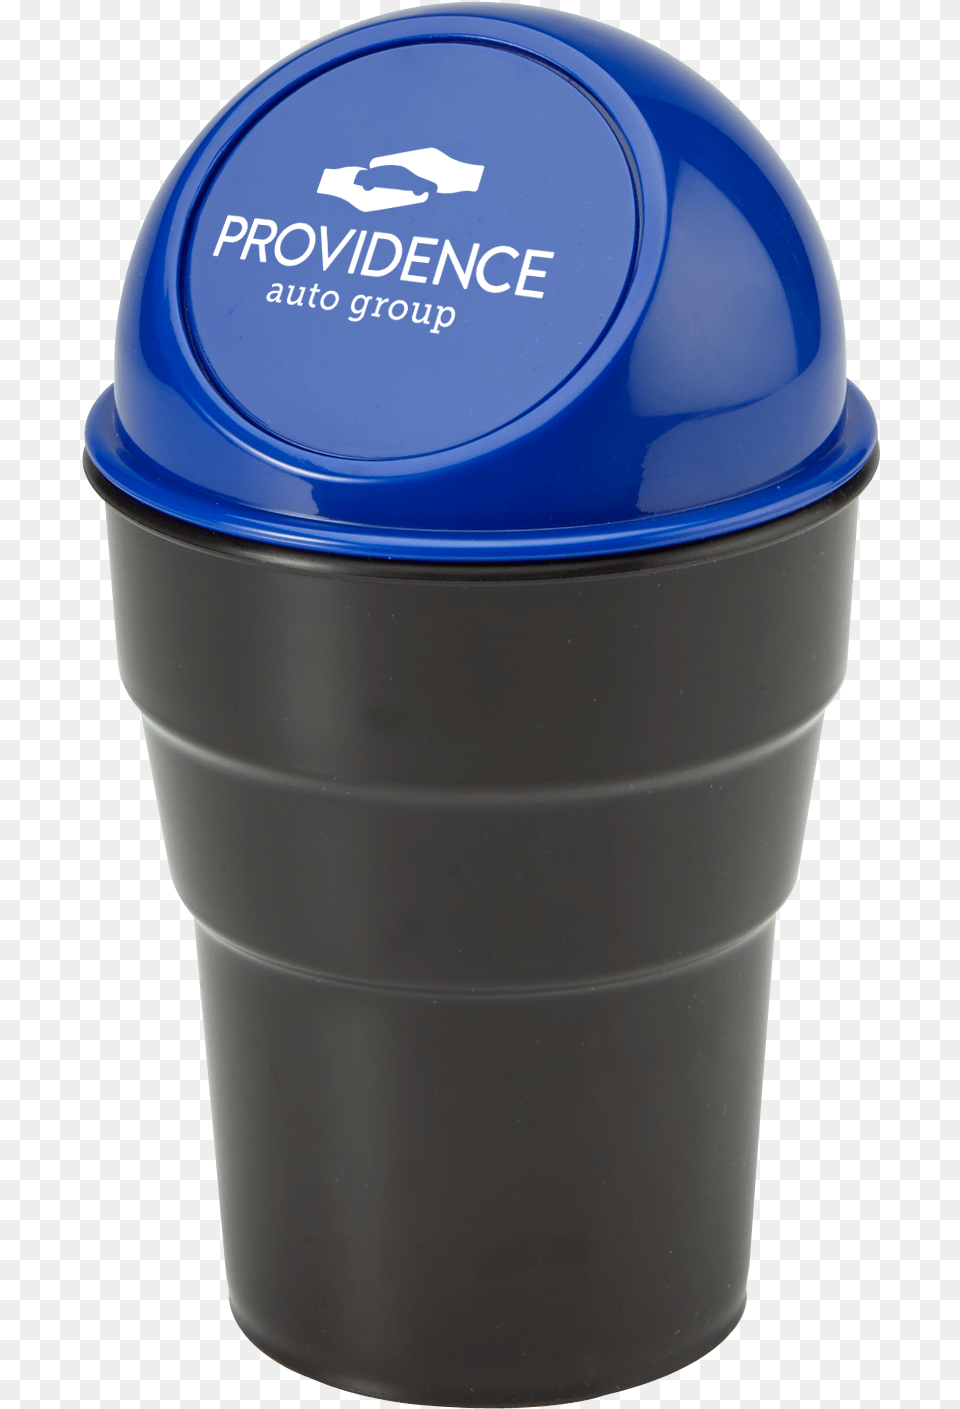 Promotional Products Supplier Water Bottle, Shaker, Can, Tin, Trash Can Free Png